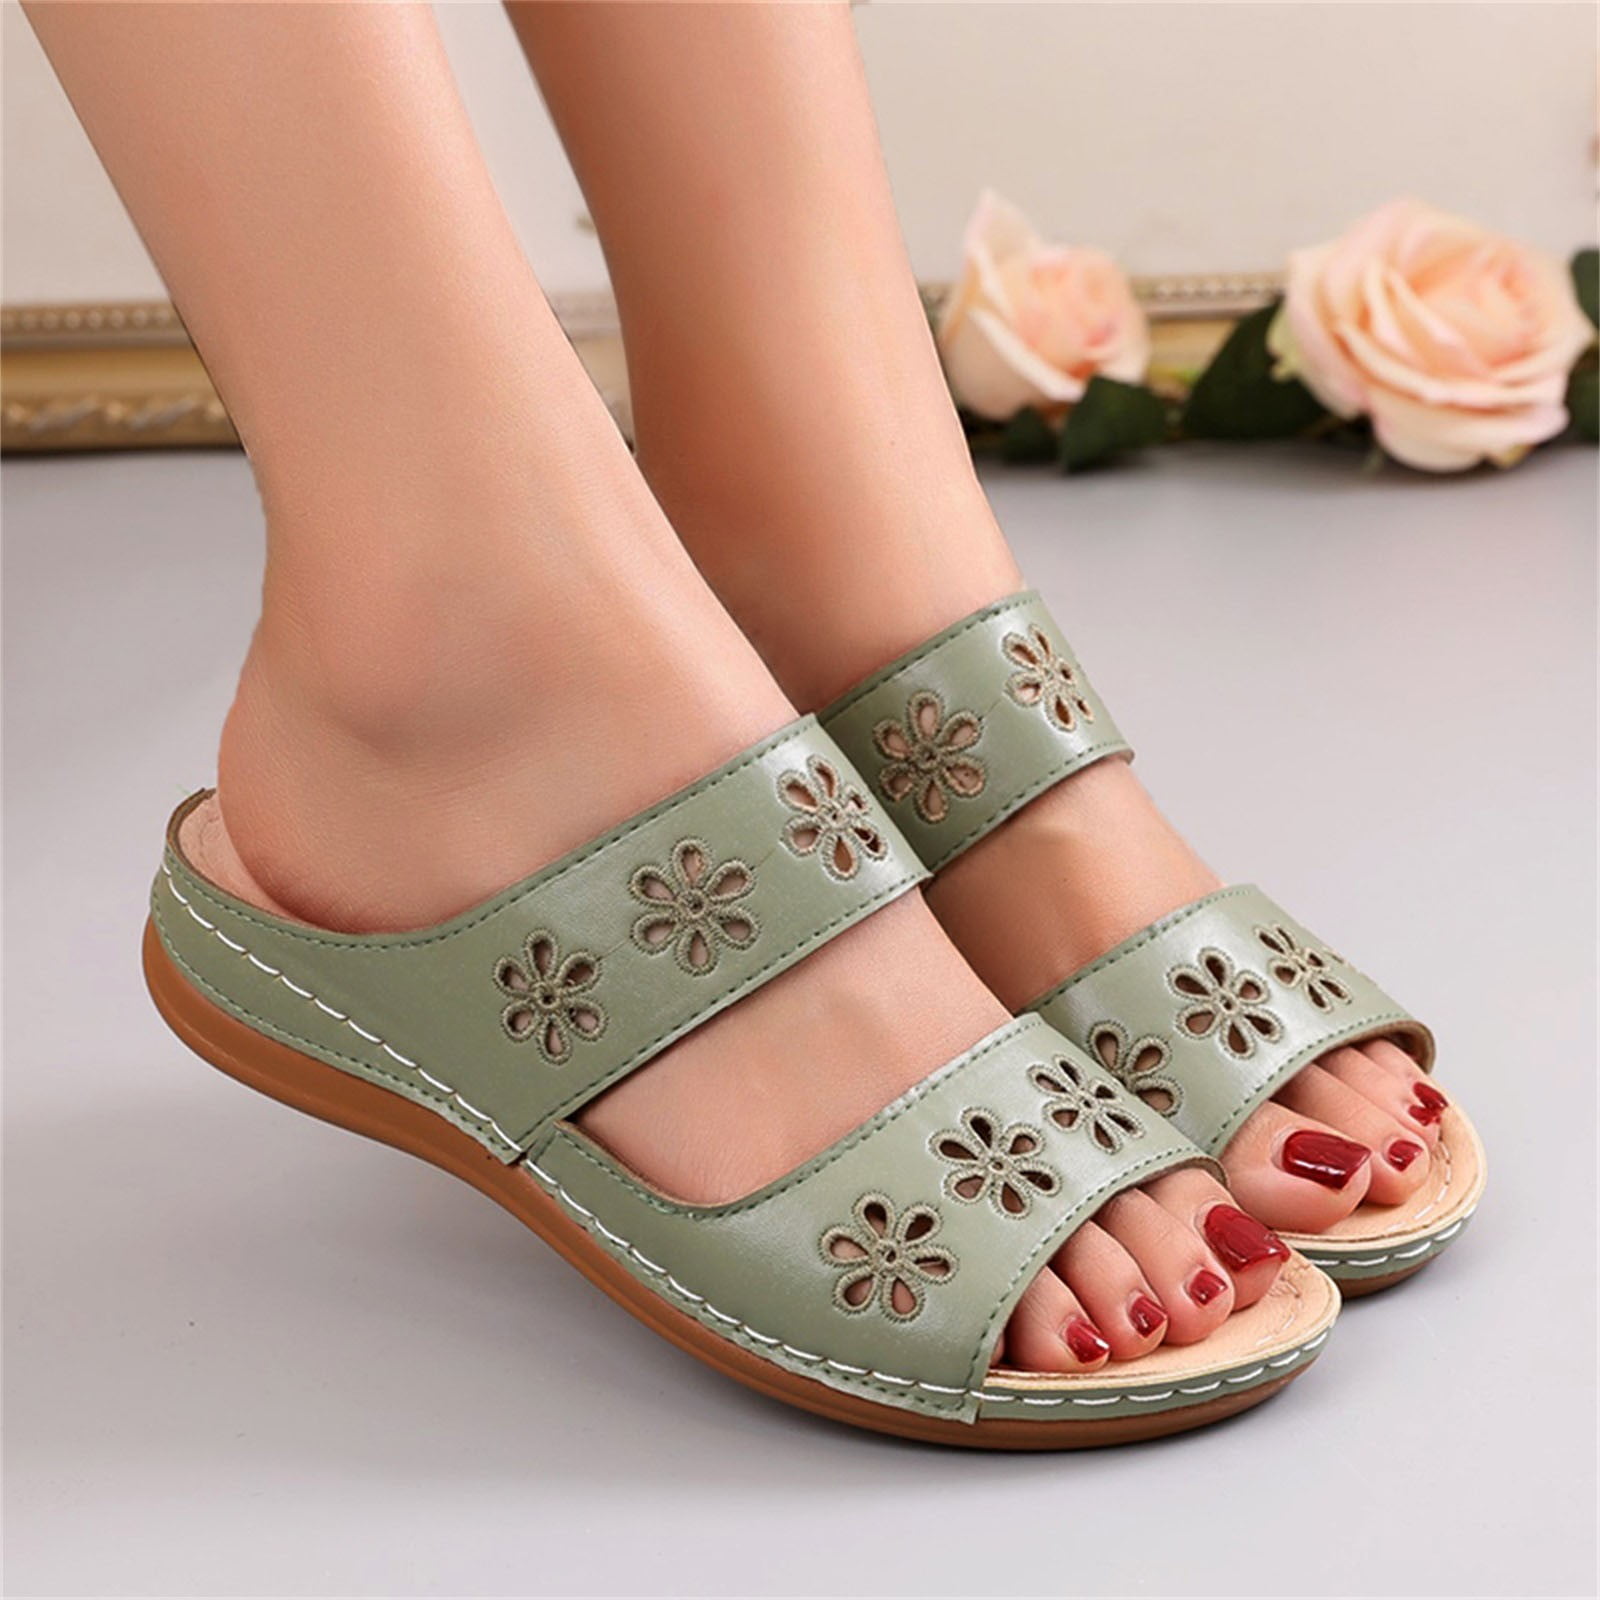 Mother's Day Specials! Brand New Women Ladies Sandals Size 38, 39, 40, 41  and 42, Women's Fashion, Footwear, Sandals on Carousell